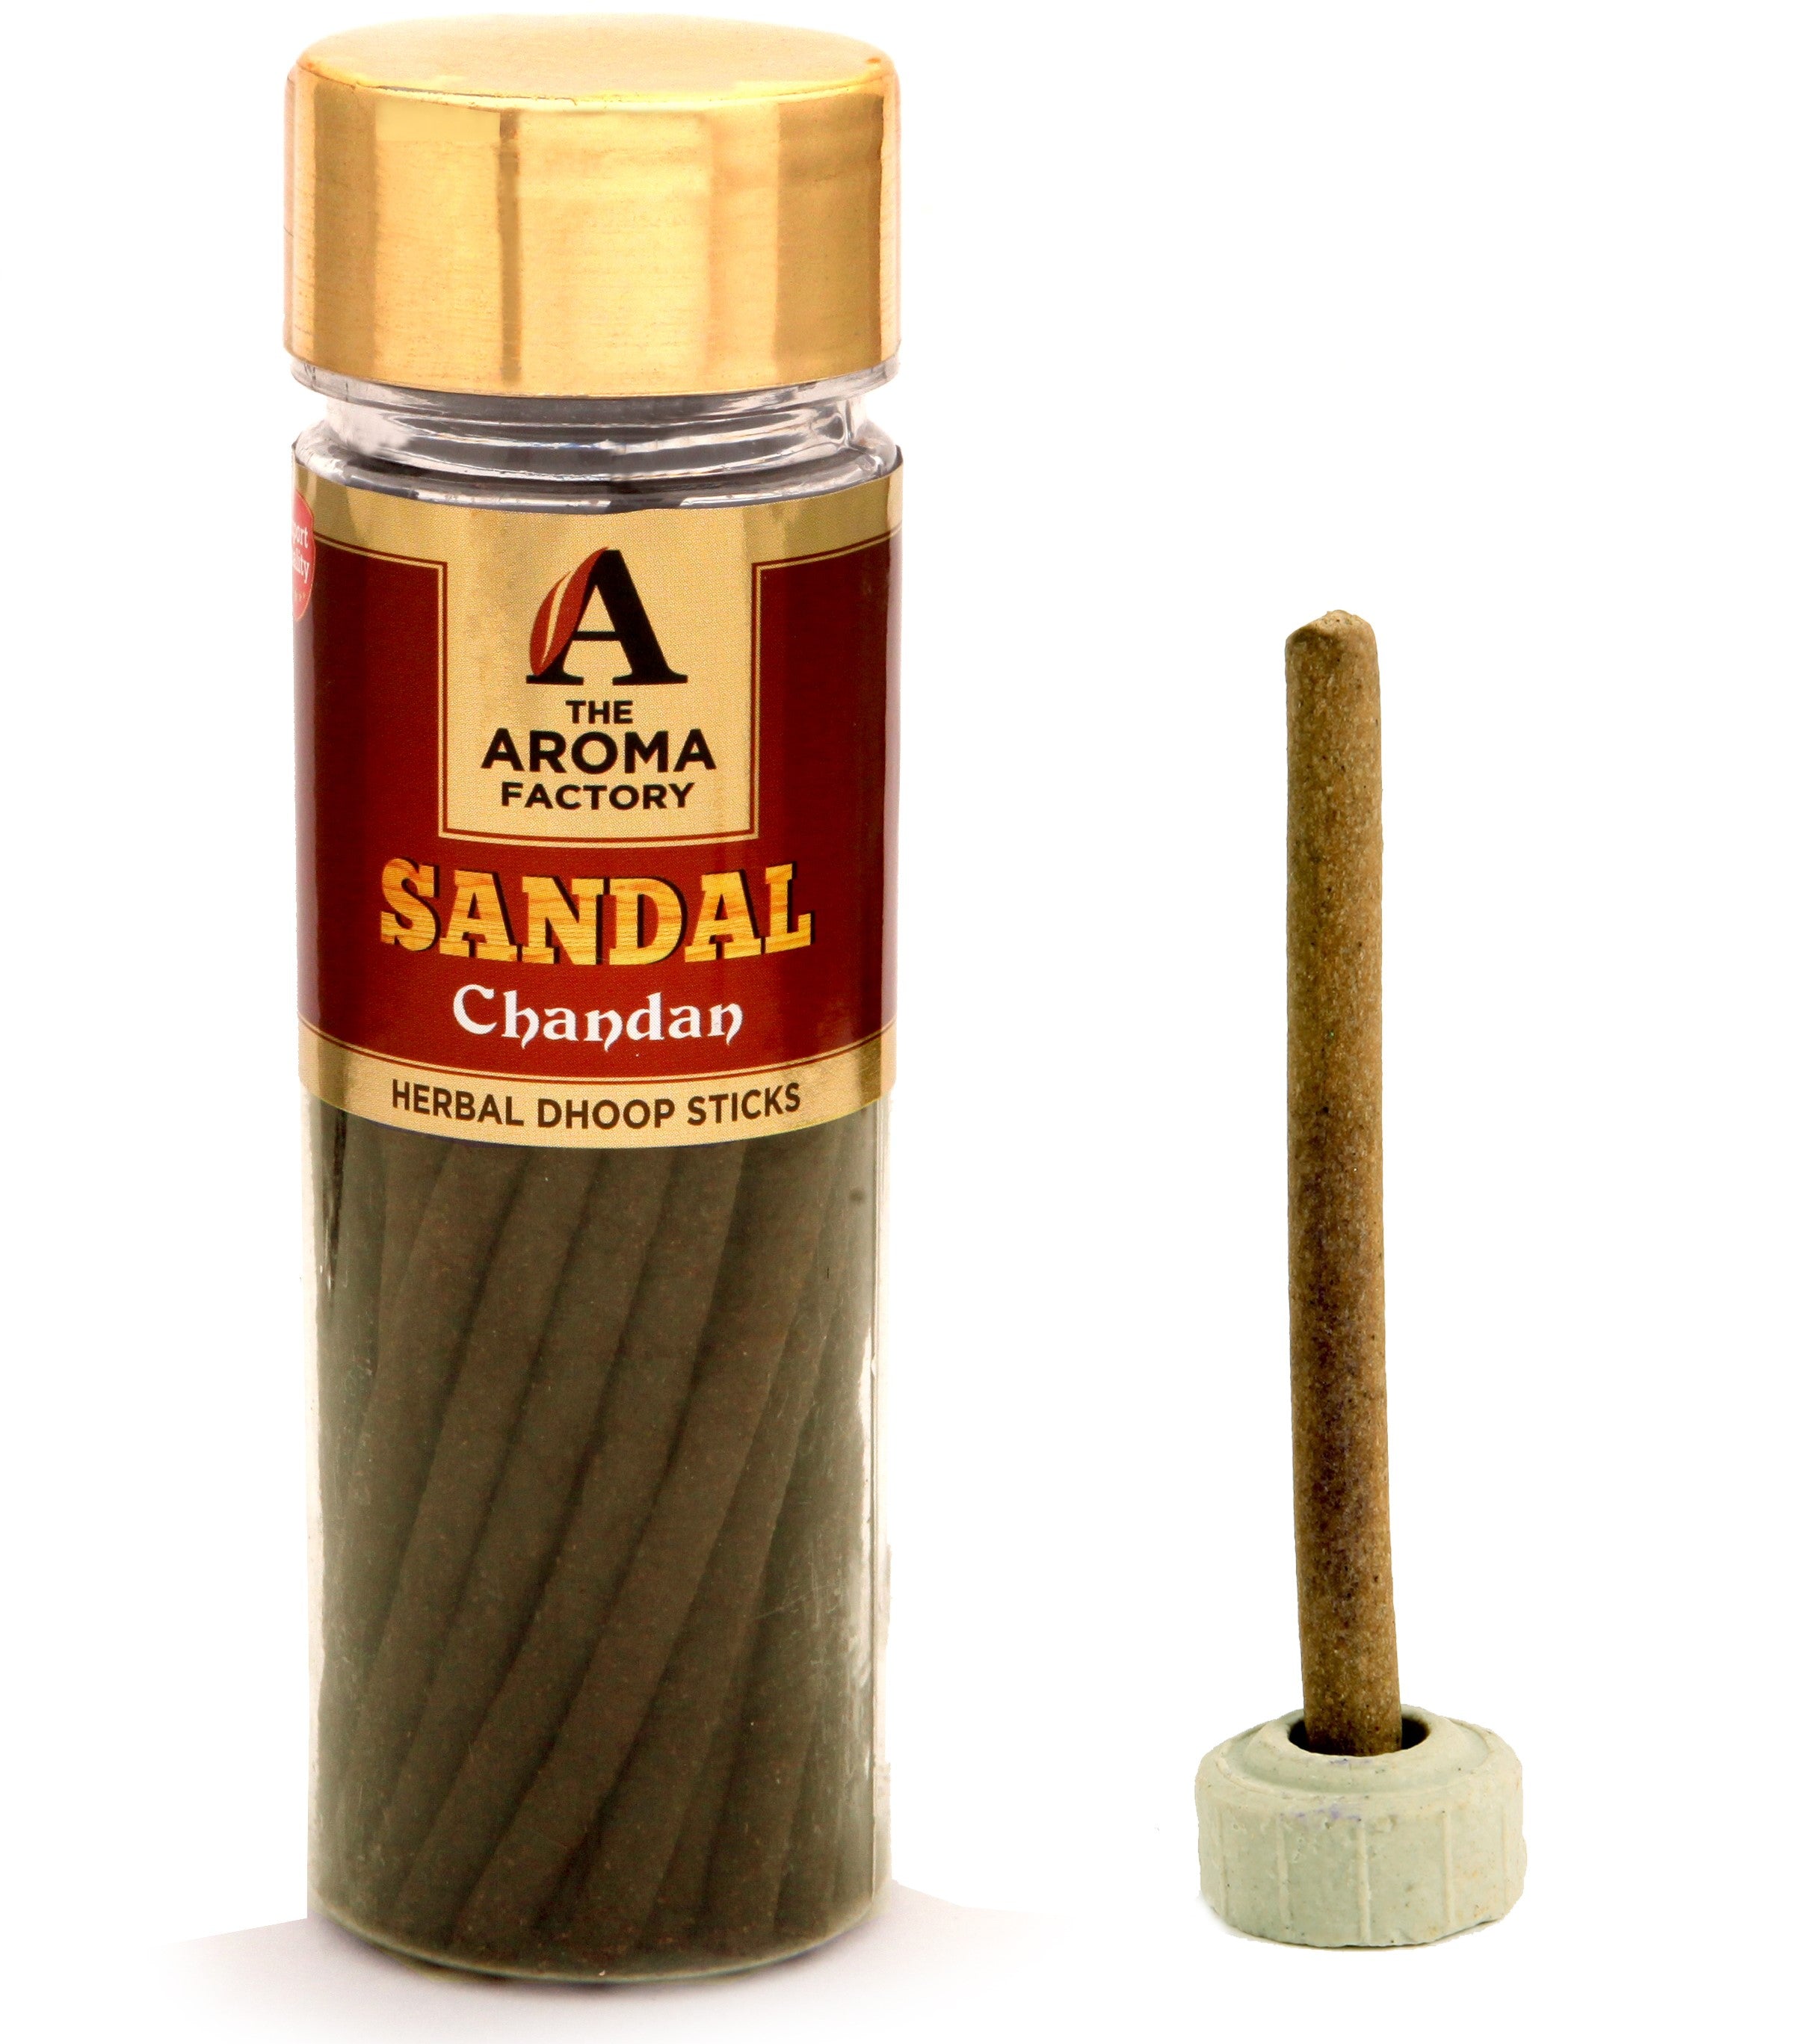 The Aroma Factory Chandan Sandal Dhoop Sticks Bottle [Free Stand] 100g